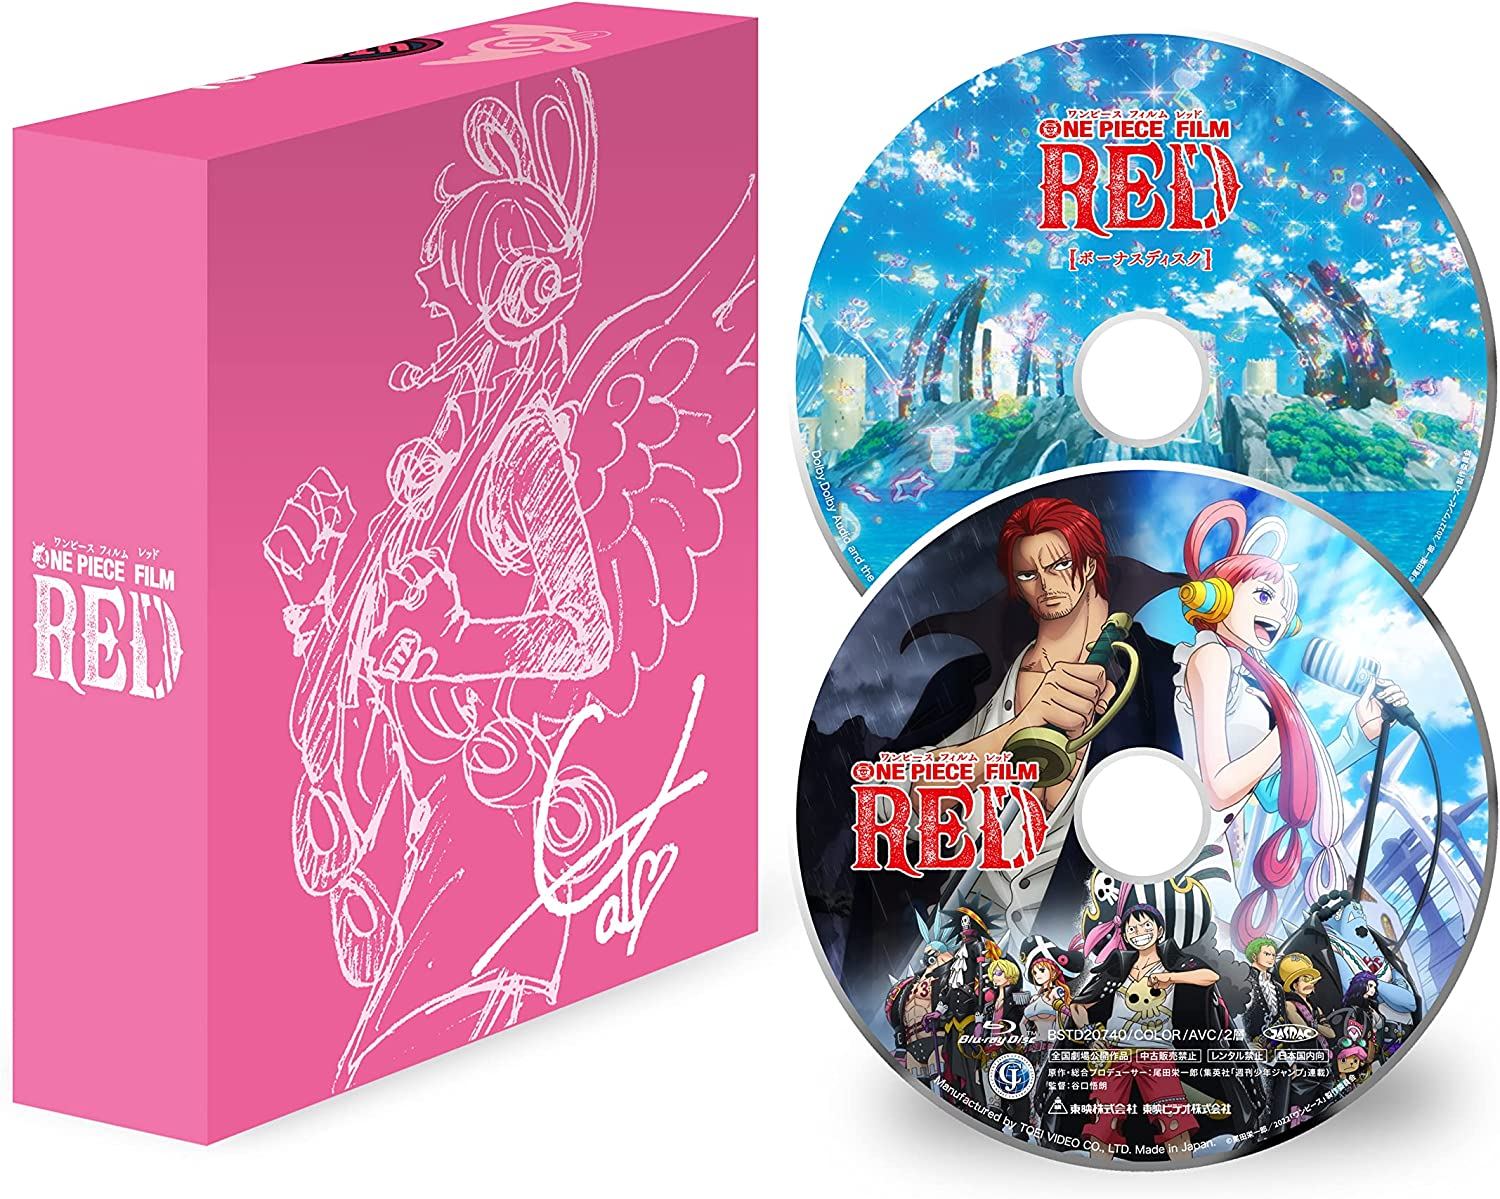 One Piece Film: Red (One Piece Film Red) - Pictures 